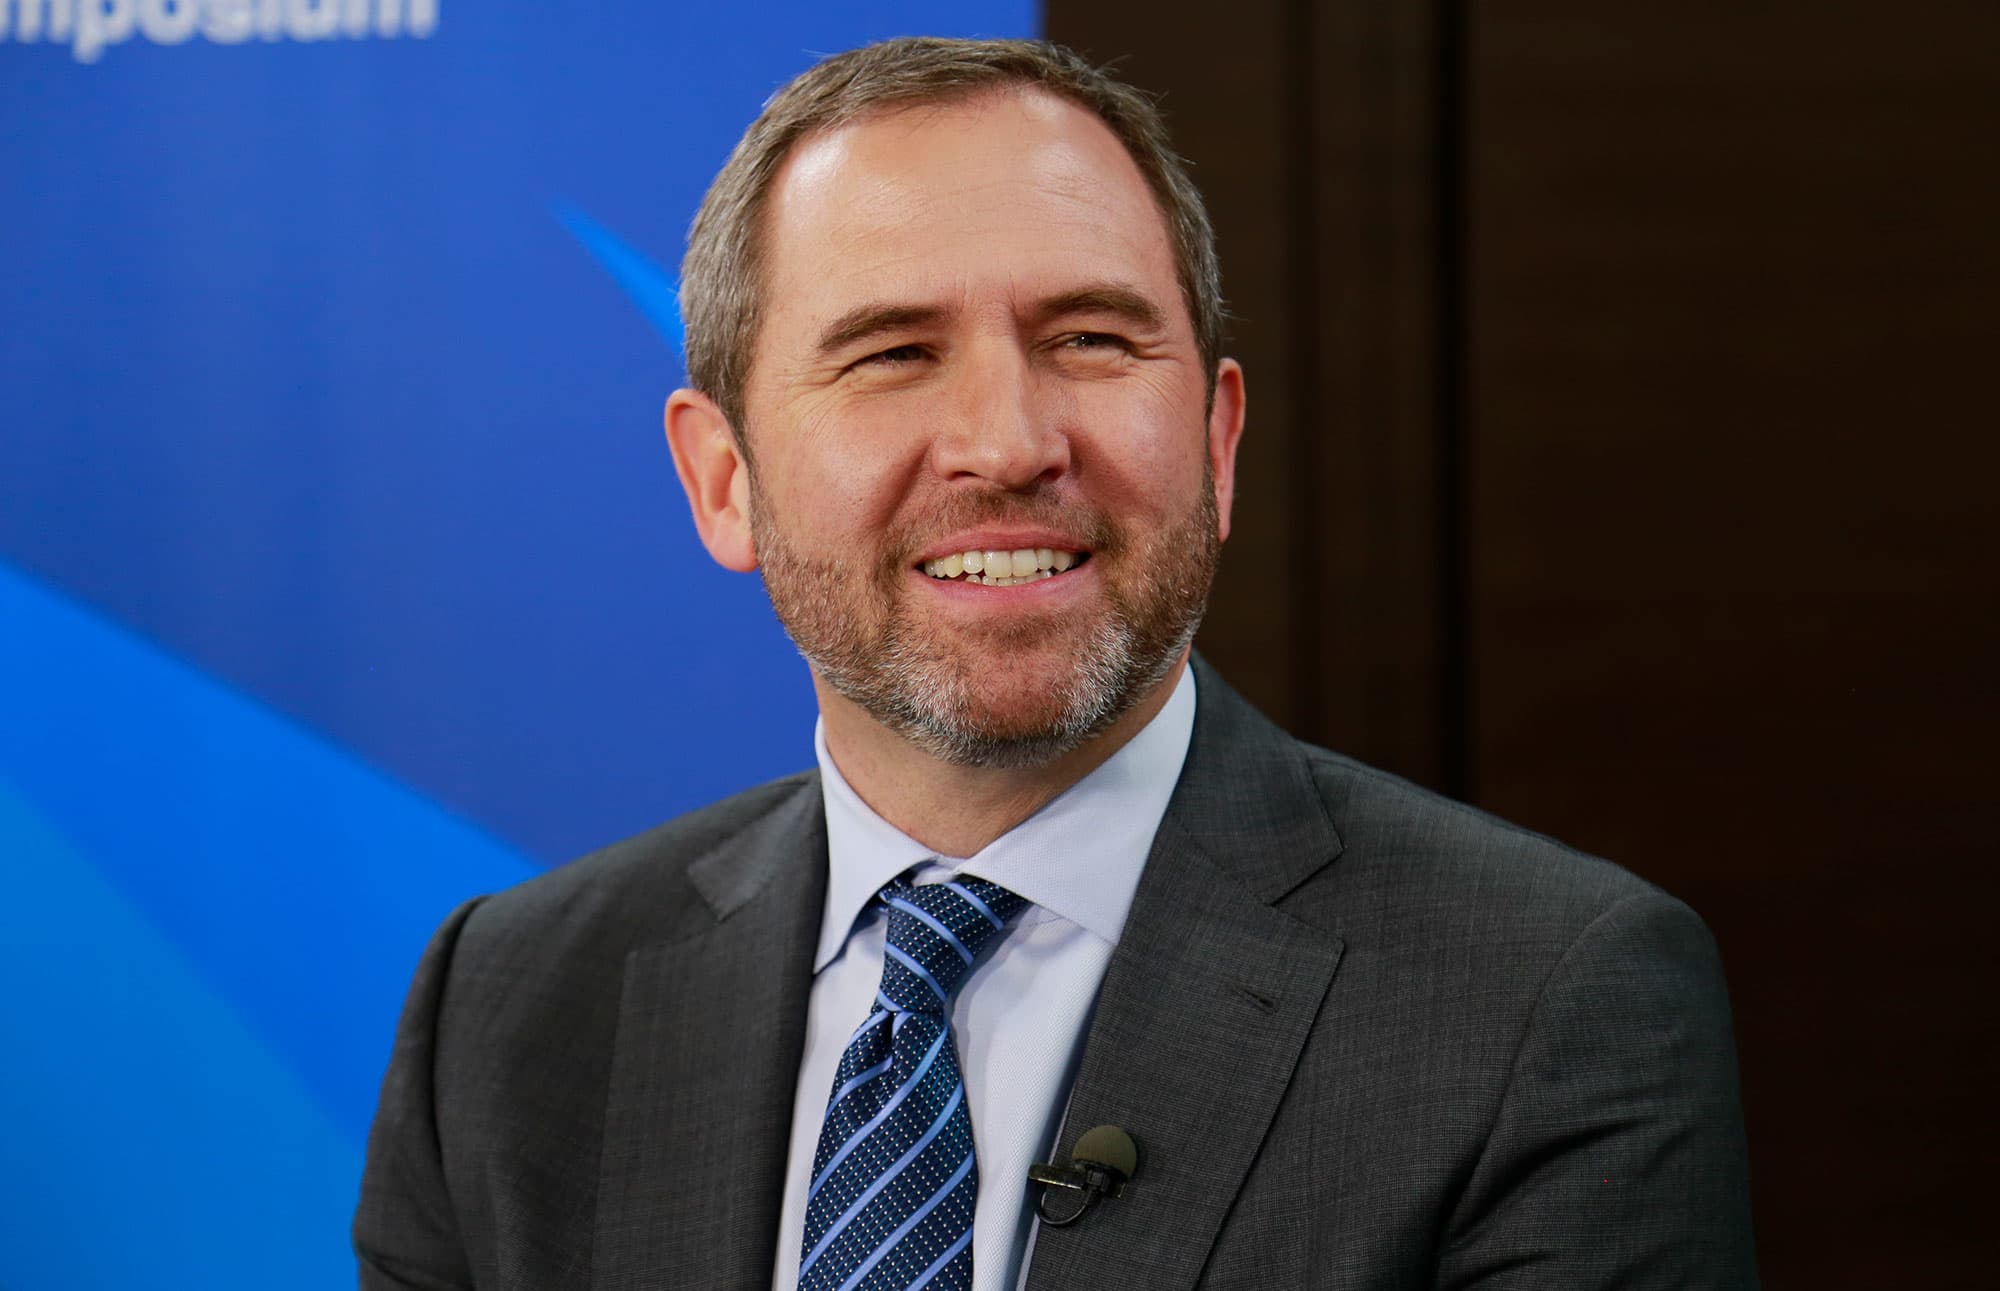 Ripple CEO Brad Garlinghouse Celebrates Court Ruling in Securities Lawsuit as Major Victory